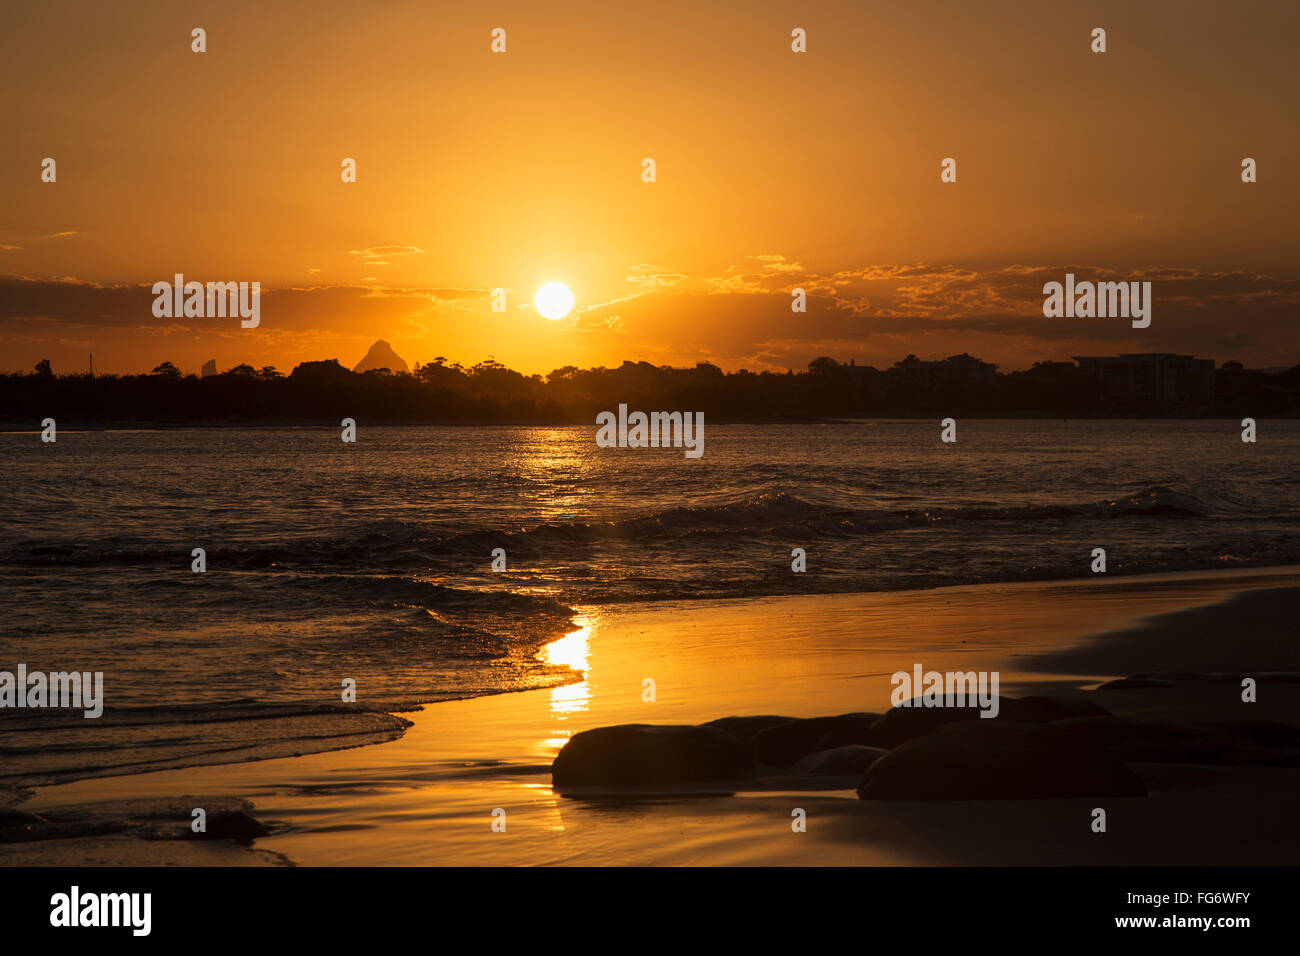 A golden sun sets over silhouetted trees and reflects on the wet beach along the coast; Caloundra, Queensland, Australia Stock Photo